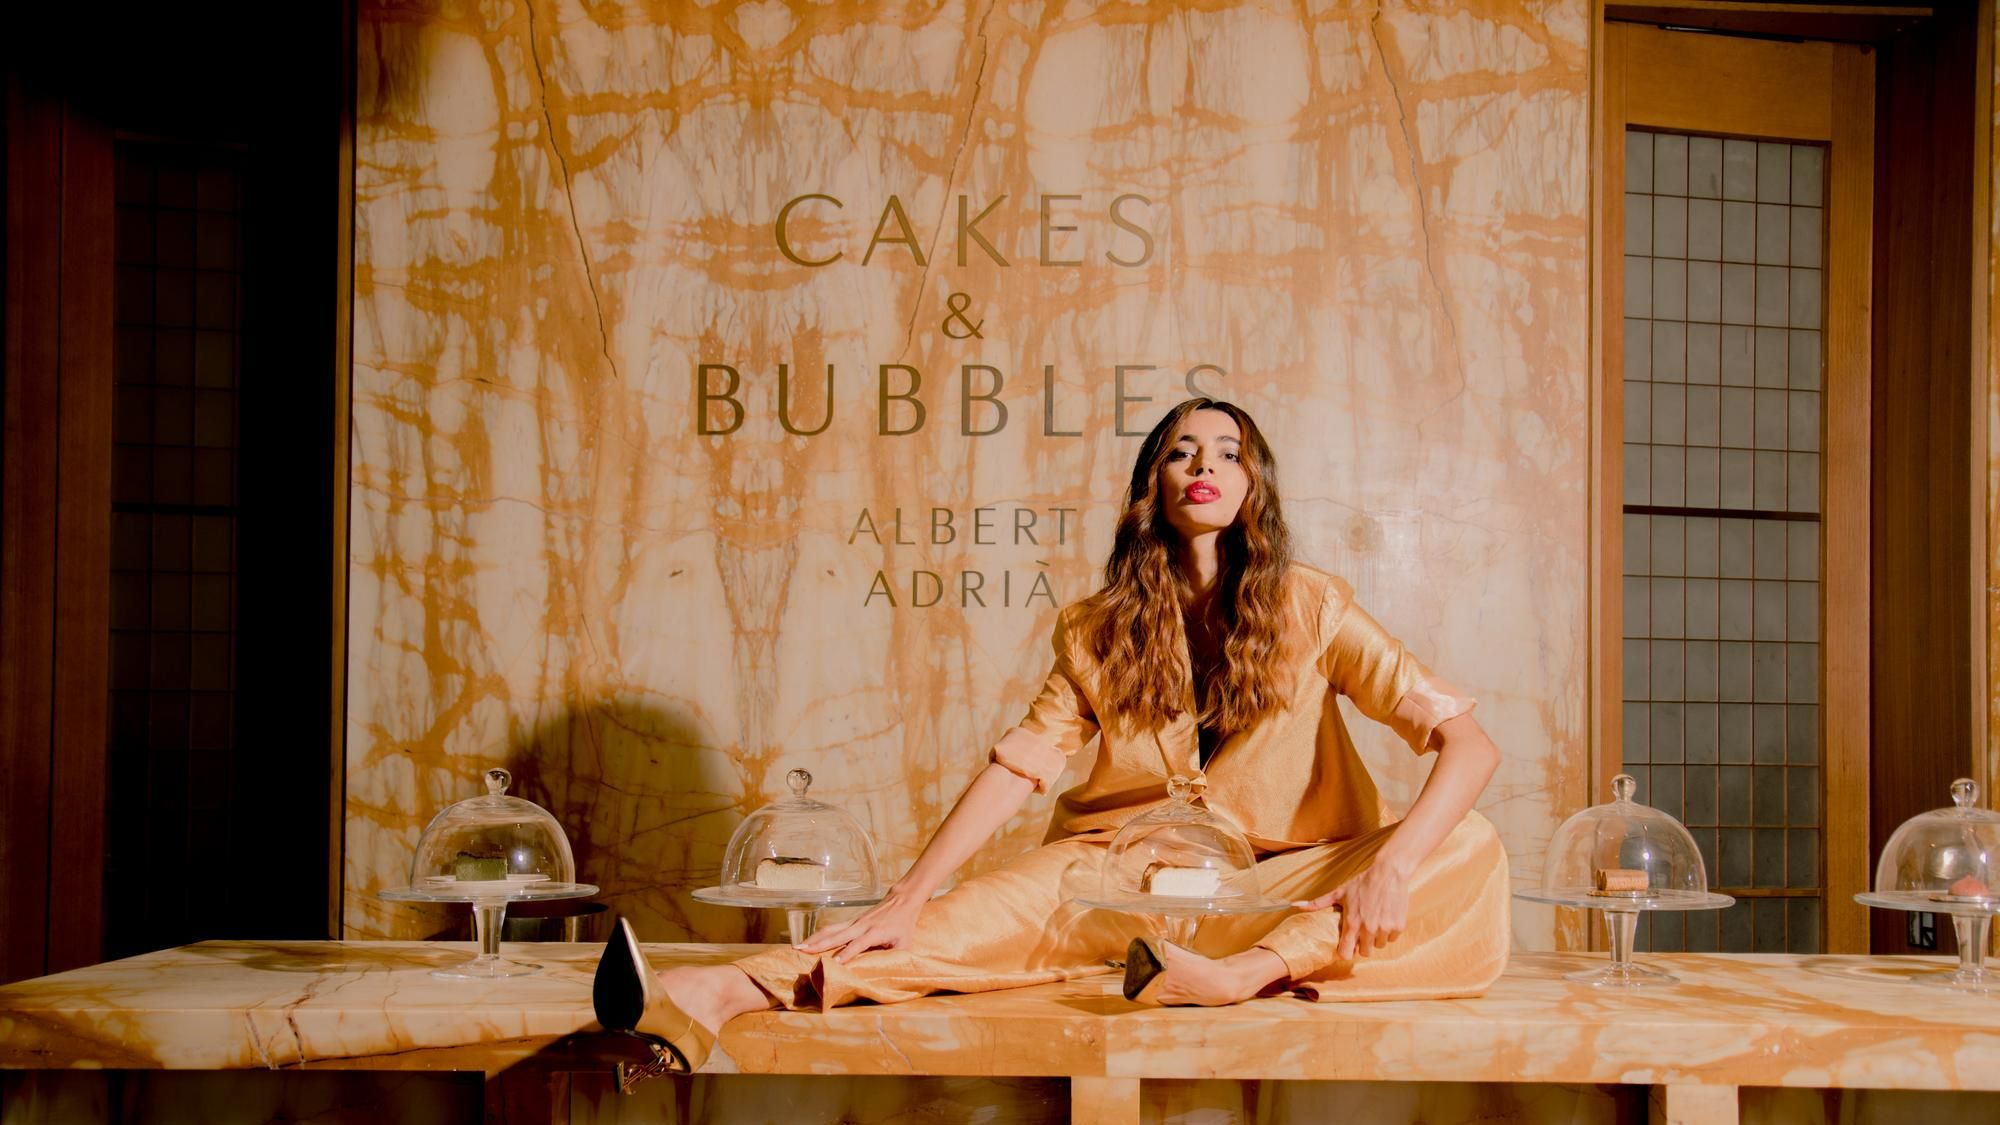 Cakes & Bubbles experience 